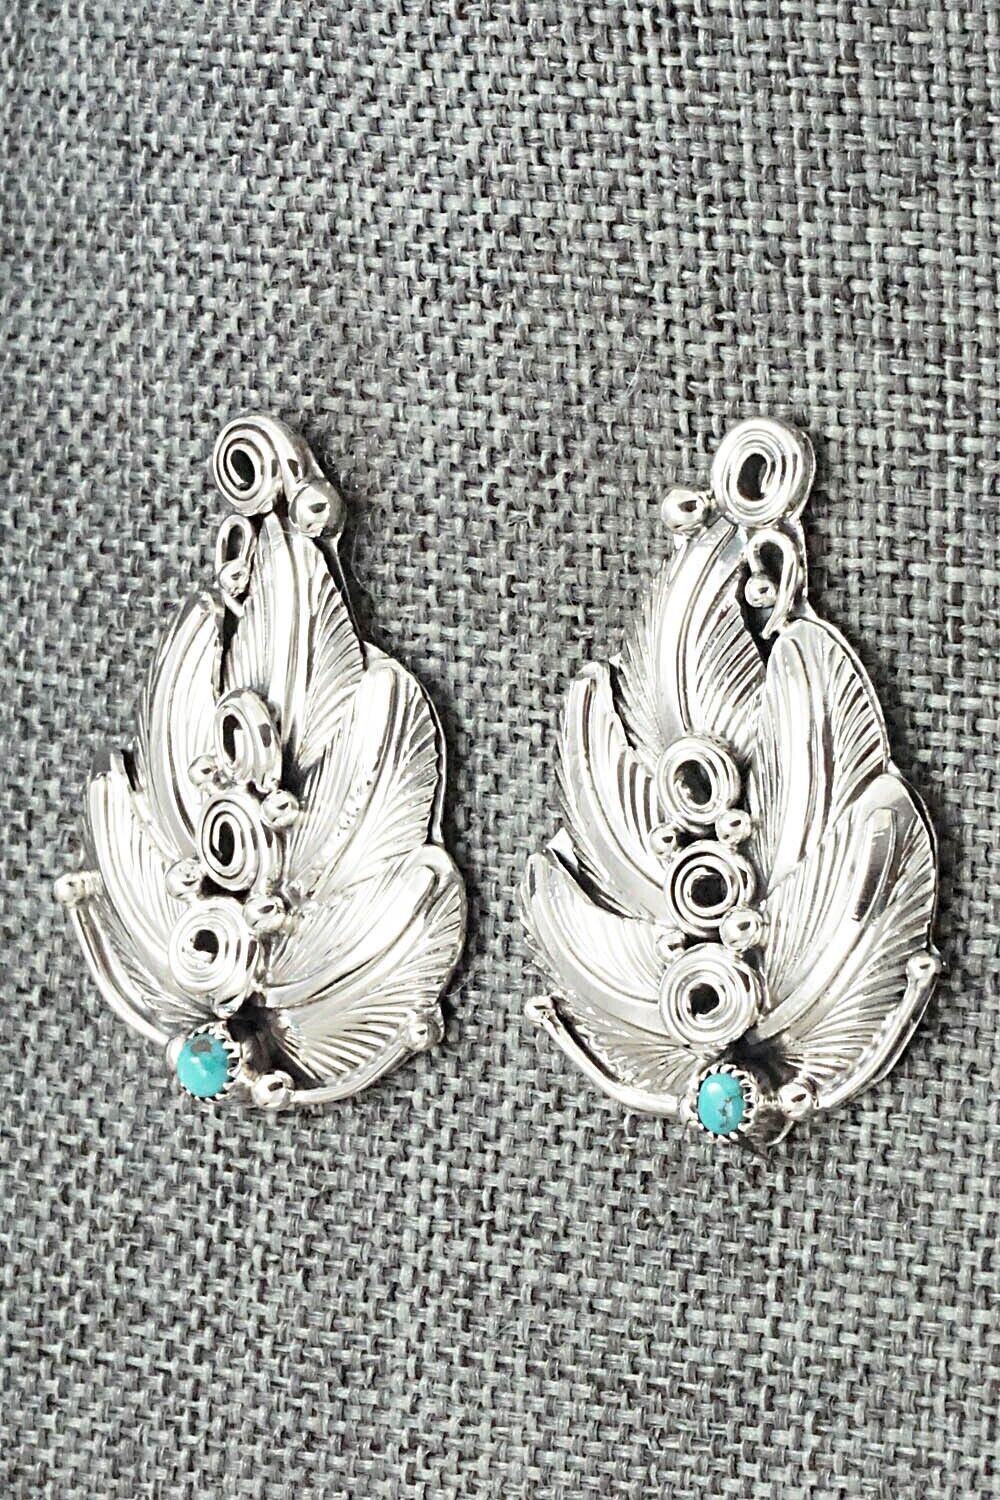 Turquoise & Sterling Silver Earrings - Darrell Morgan